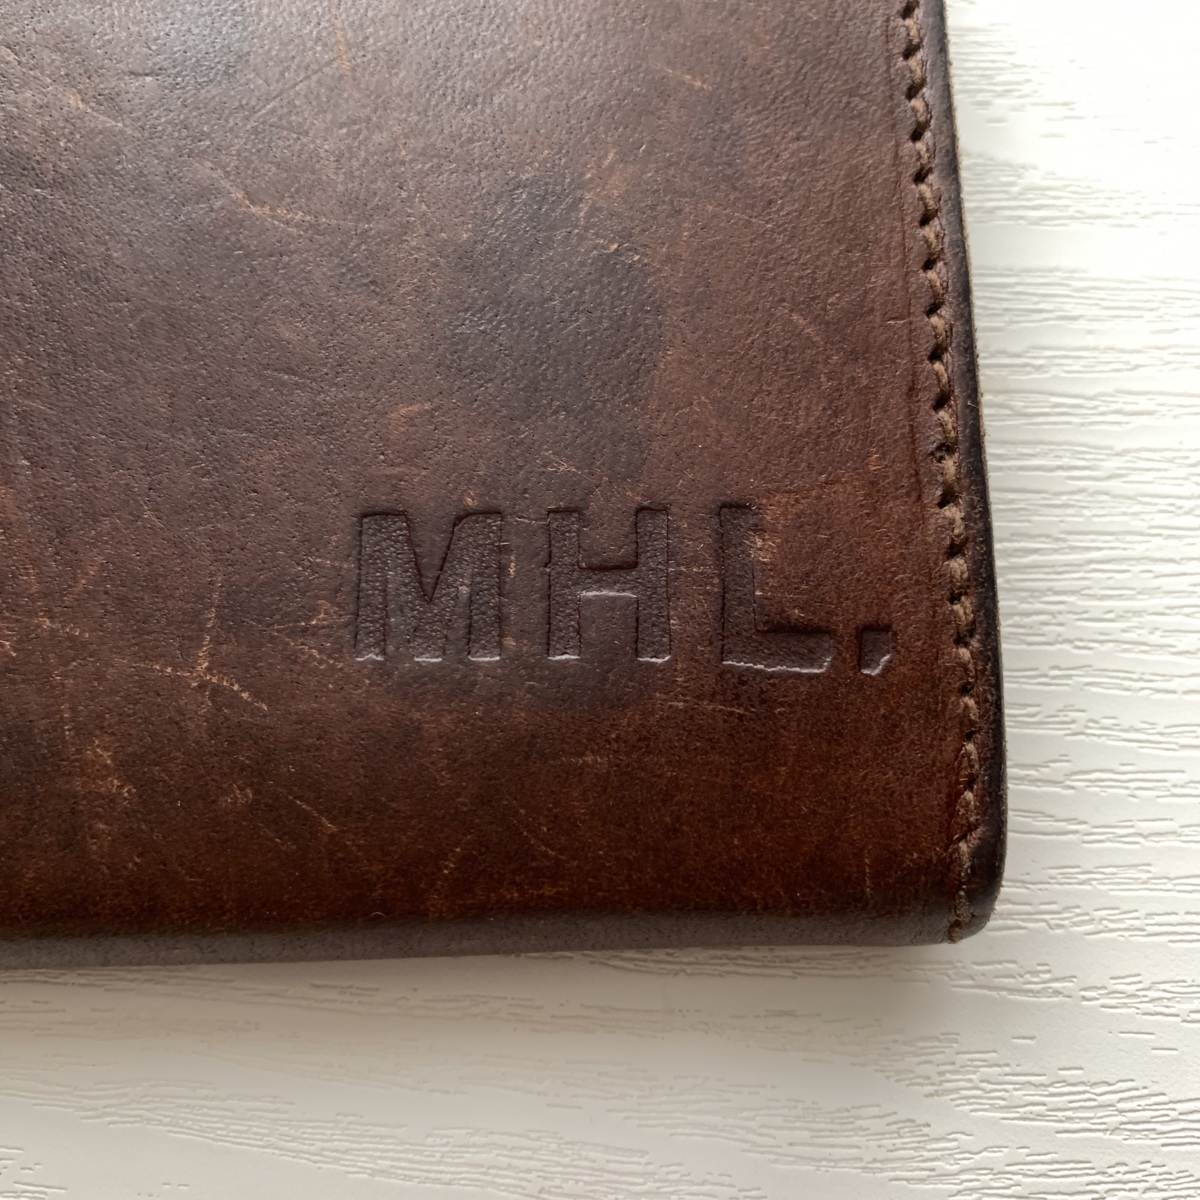 MARGARET HOWELL MHL. TOUGH LEATHER Compact Wallet マーガレットハウエル タフ レザー 2つ折り 財布  ダーク ブラウン